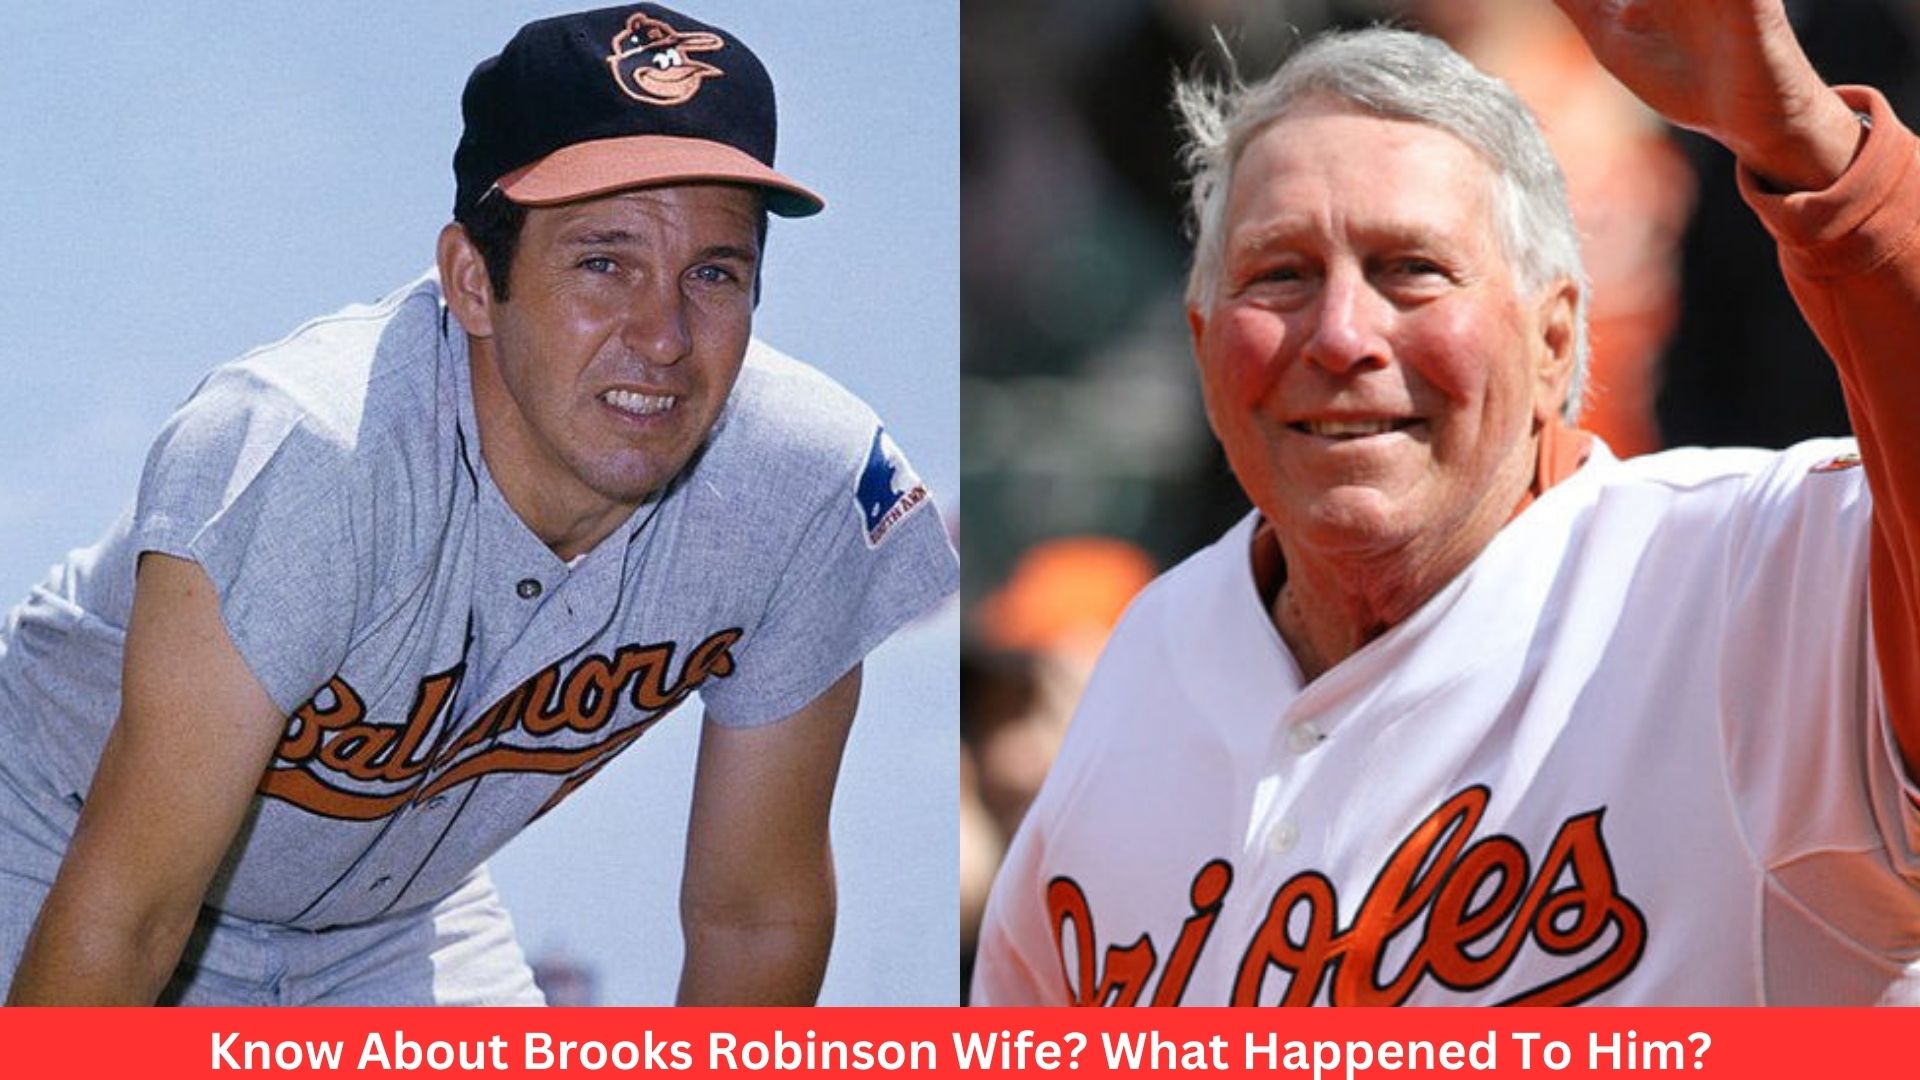 Know About Brooks Robinson Wife? What Happened To Him?